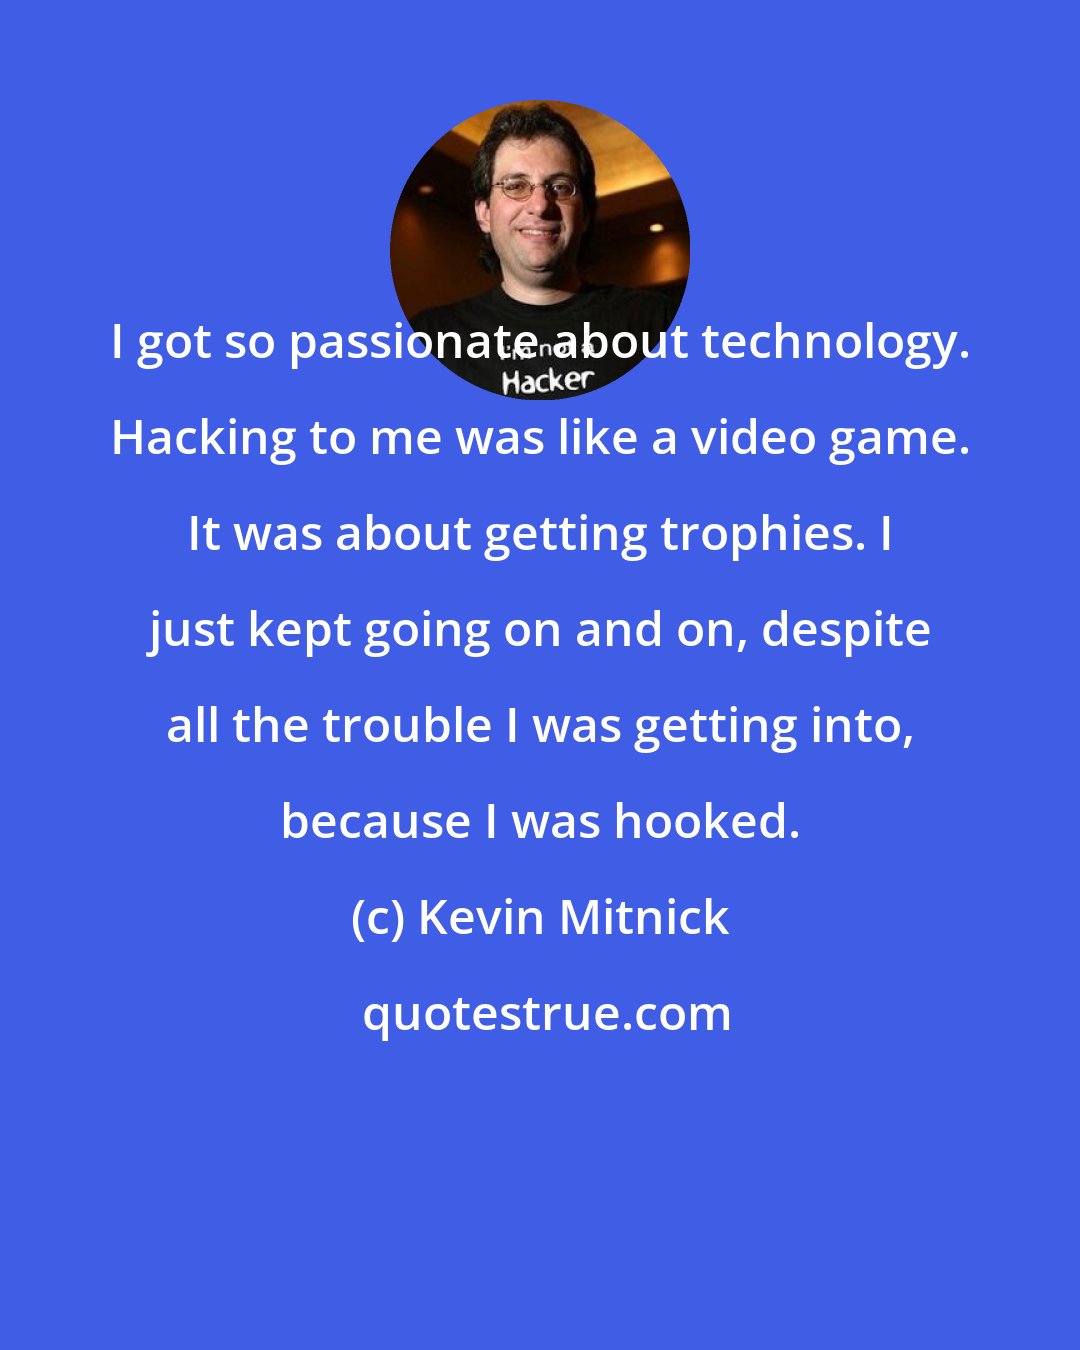 Kevin Mitnick: I got so passionate about technology. Hacking to me was like a video game. It was about getting trophies. I just kept going on and on, despite all the trouble I was getting into, because I was hooked.